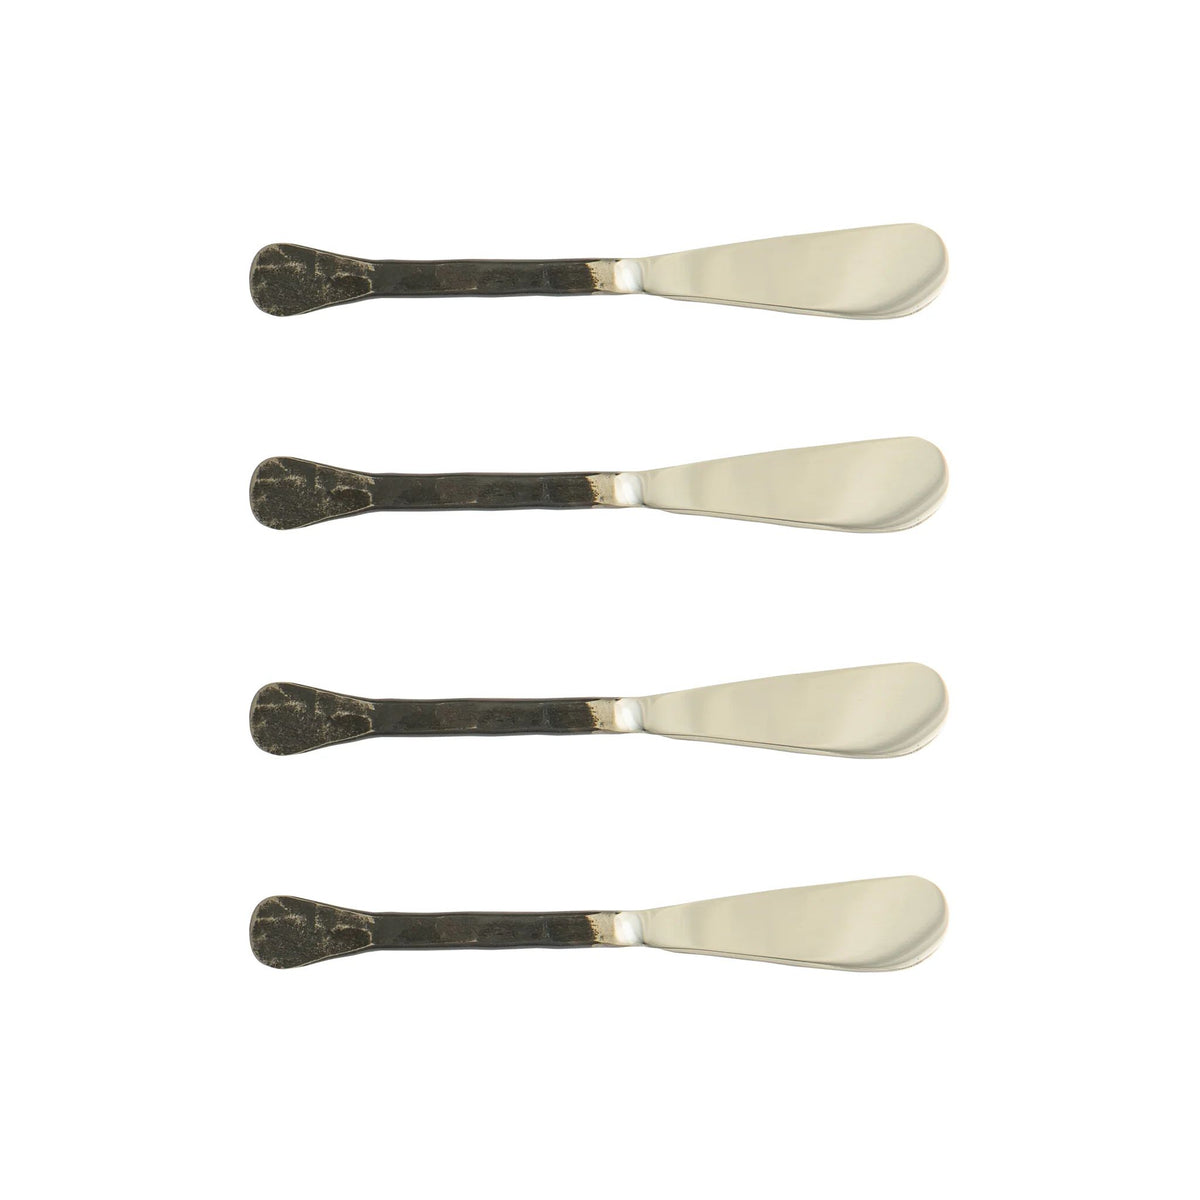 Set of 4 Forge Spreaders